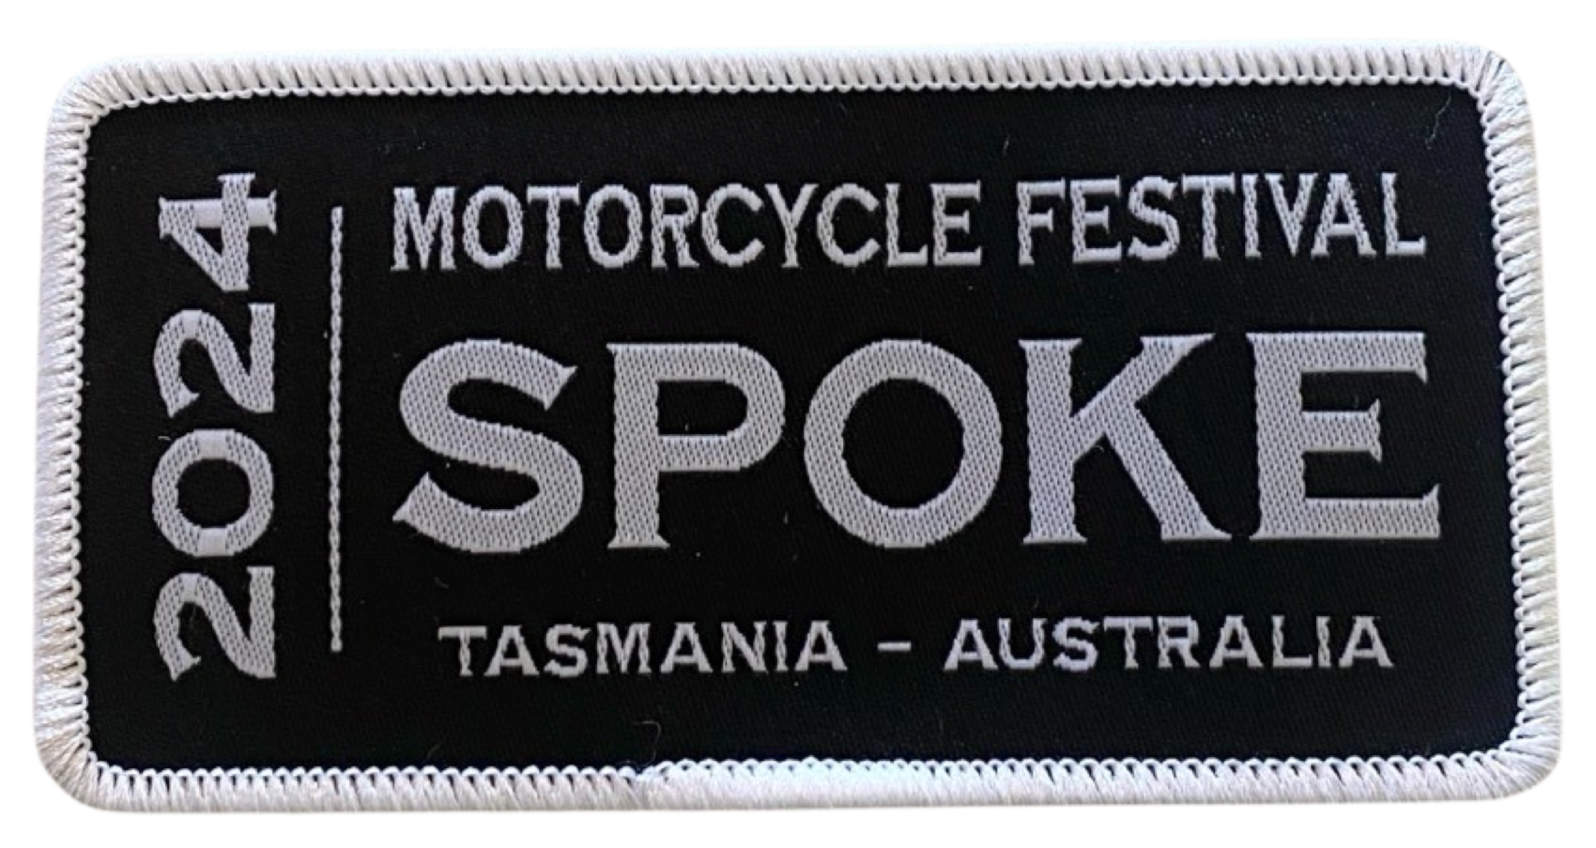 Spoke 2024 Embroidered Patch